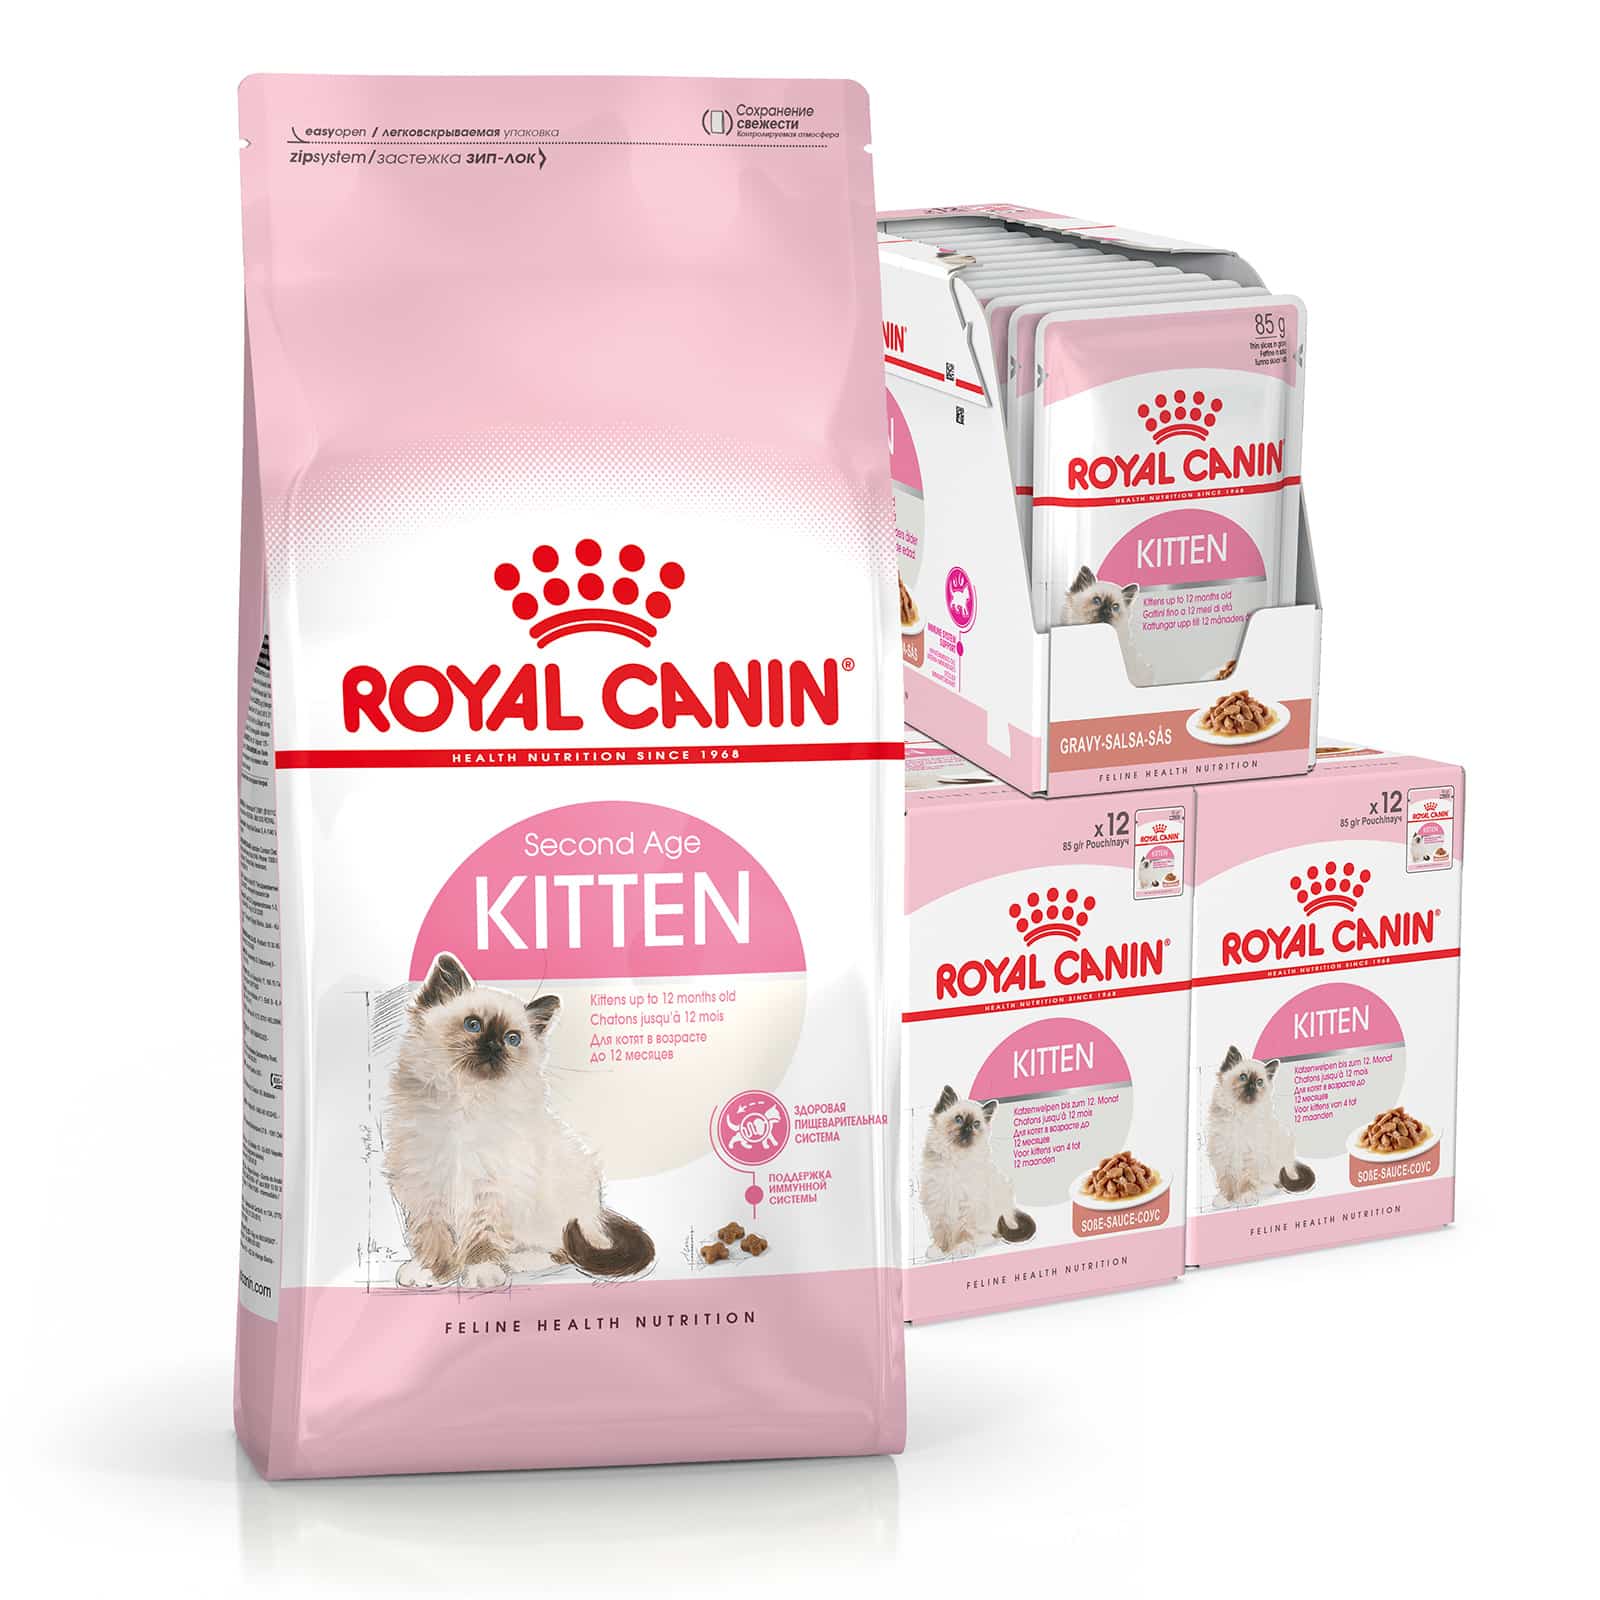 Royal Canin Bundle Kitten Gravy Wet And Dry Cat Food